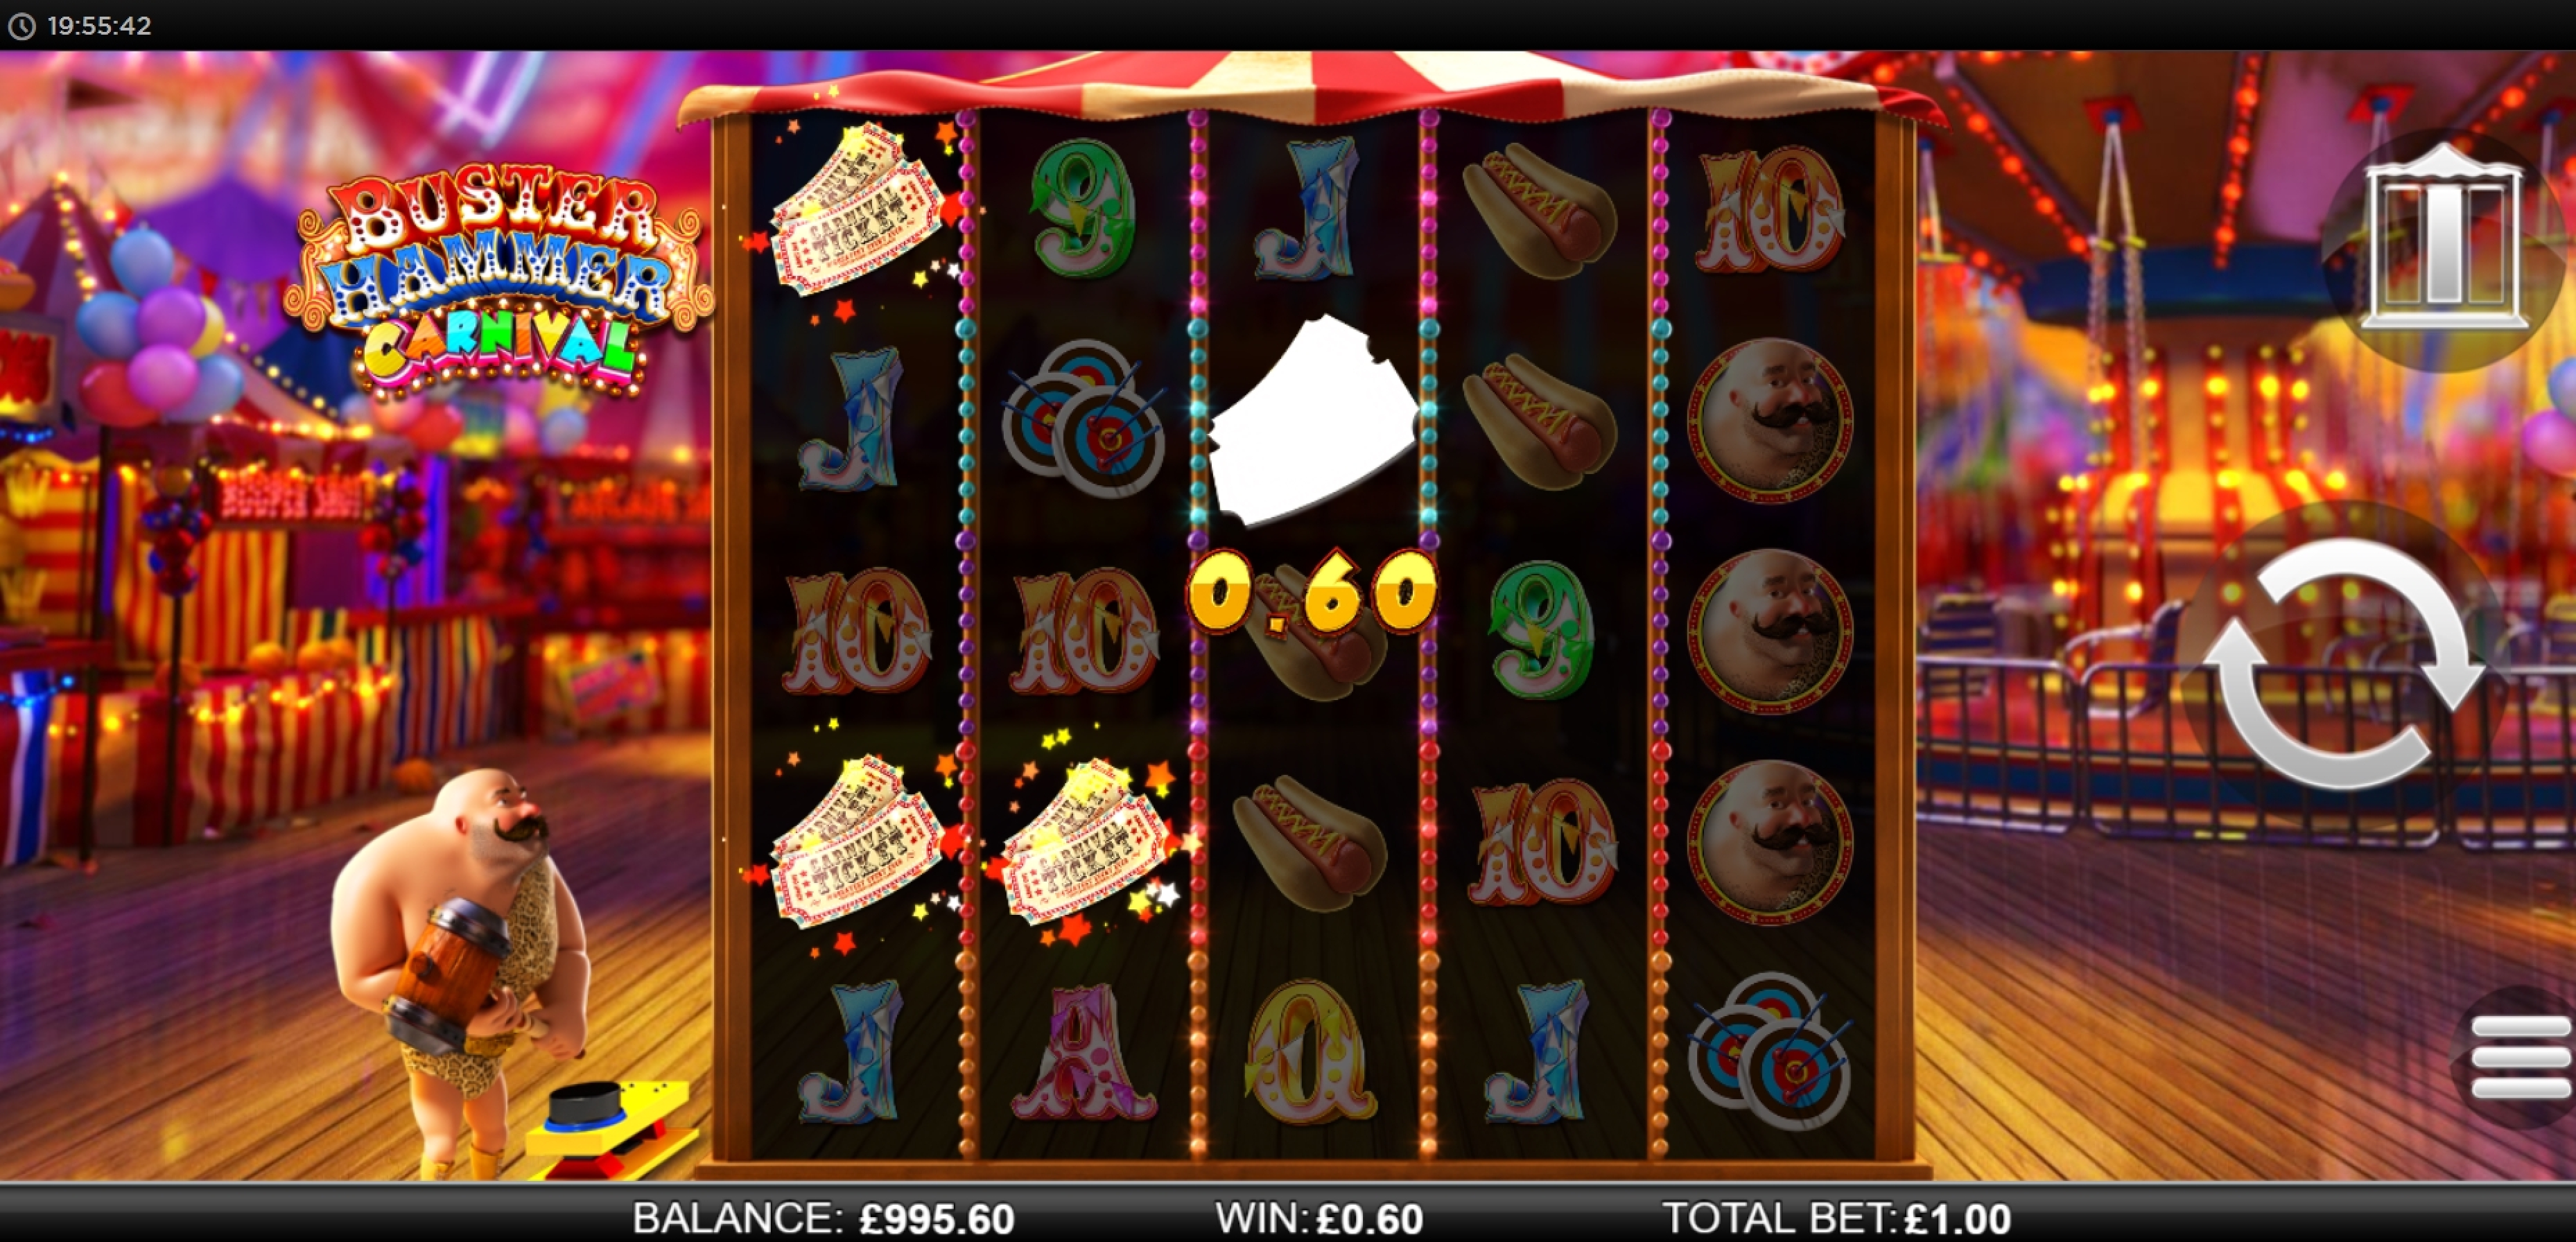 Win Money in Buster Hammer Carnival Free Slot Game by Reel Play